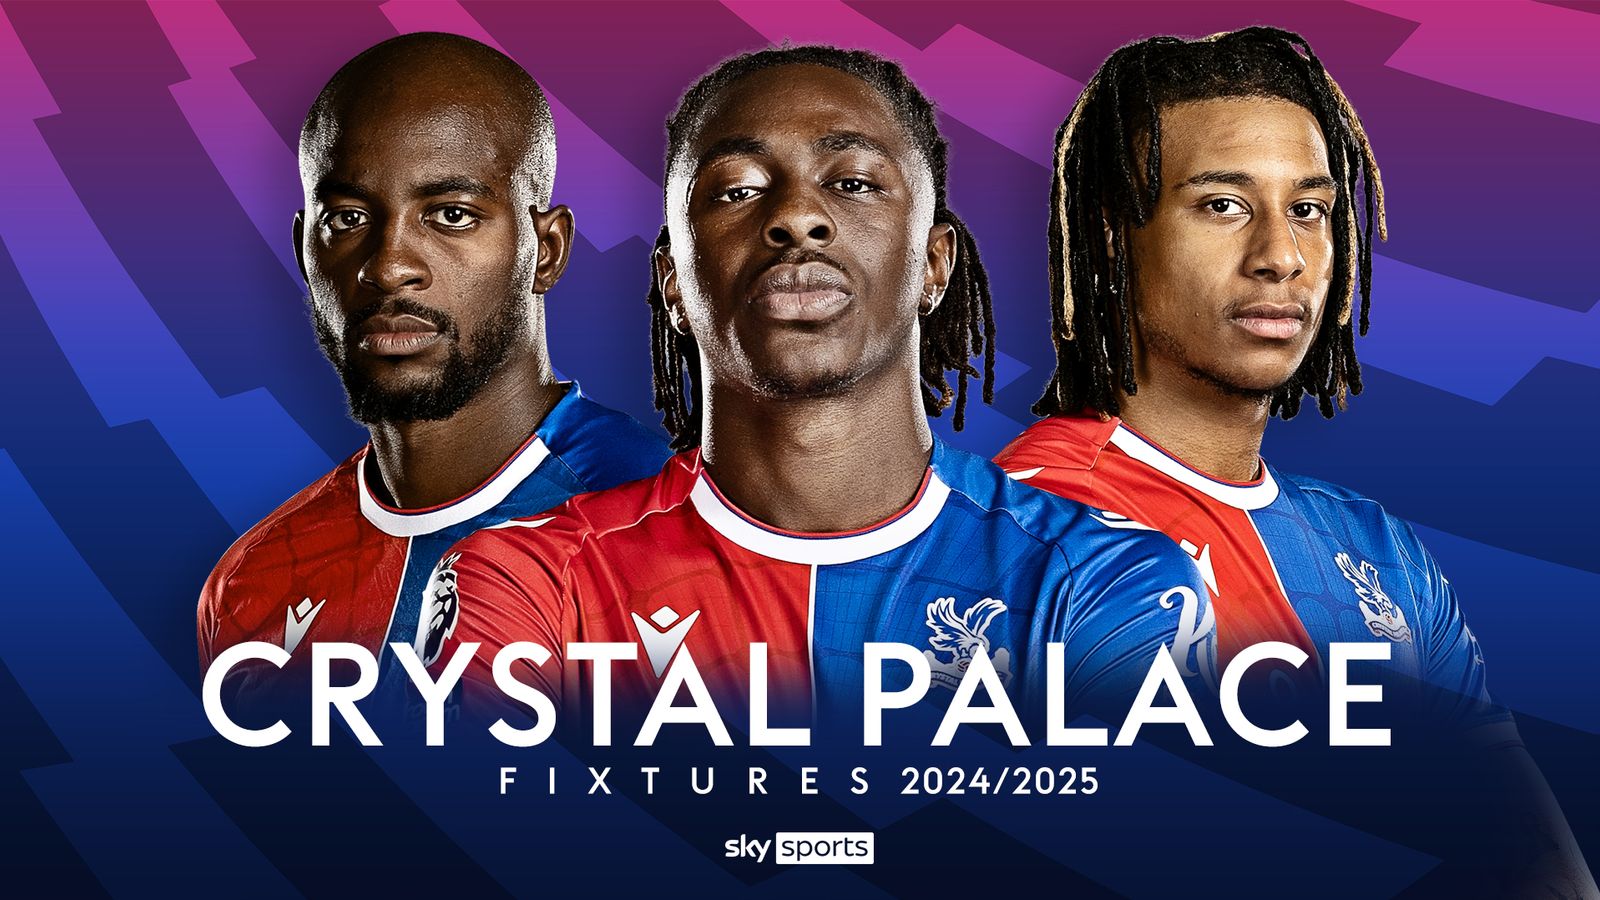 Crystal Palace Premier League 2024/25 fixtures and schedule Football